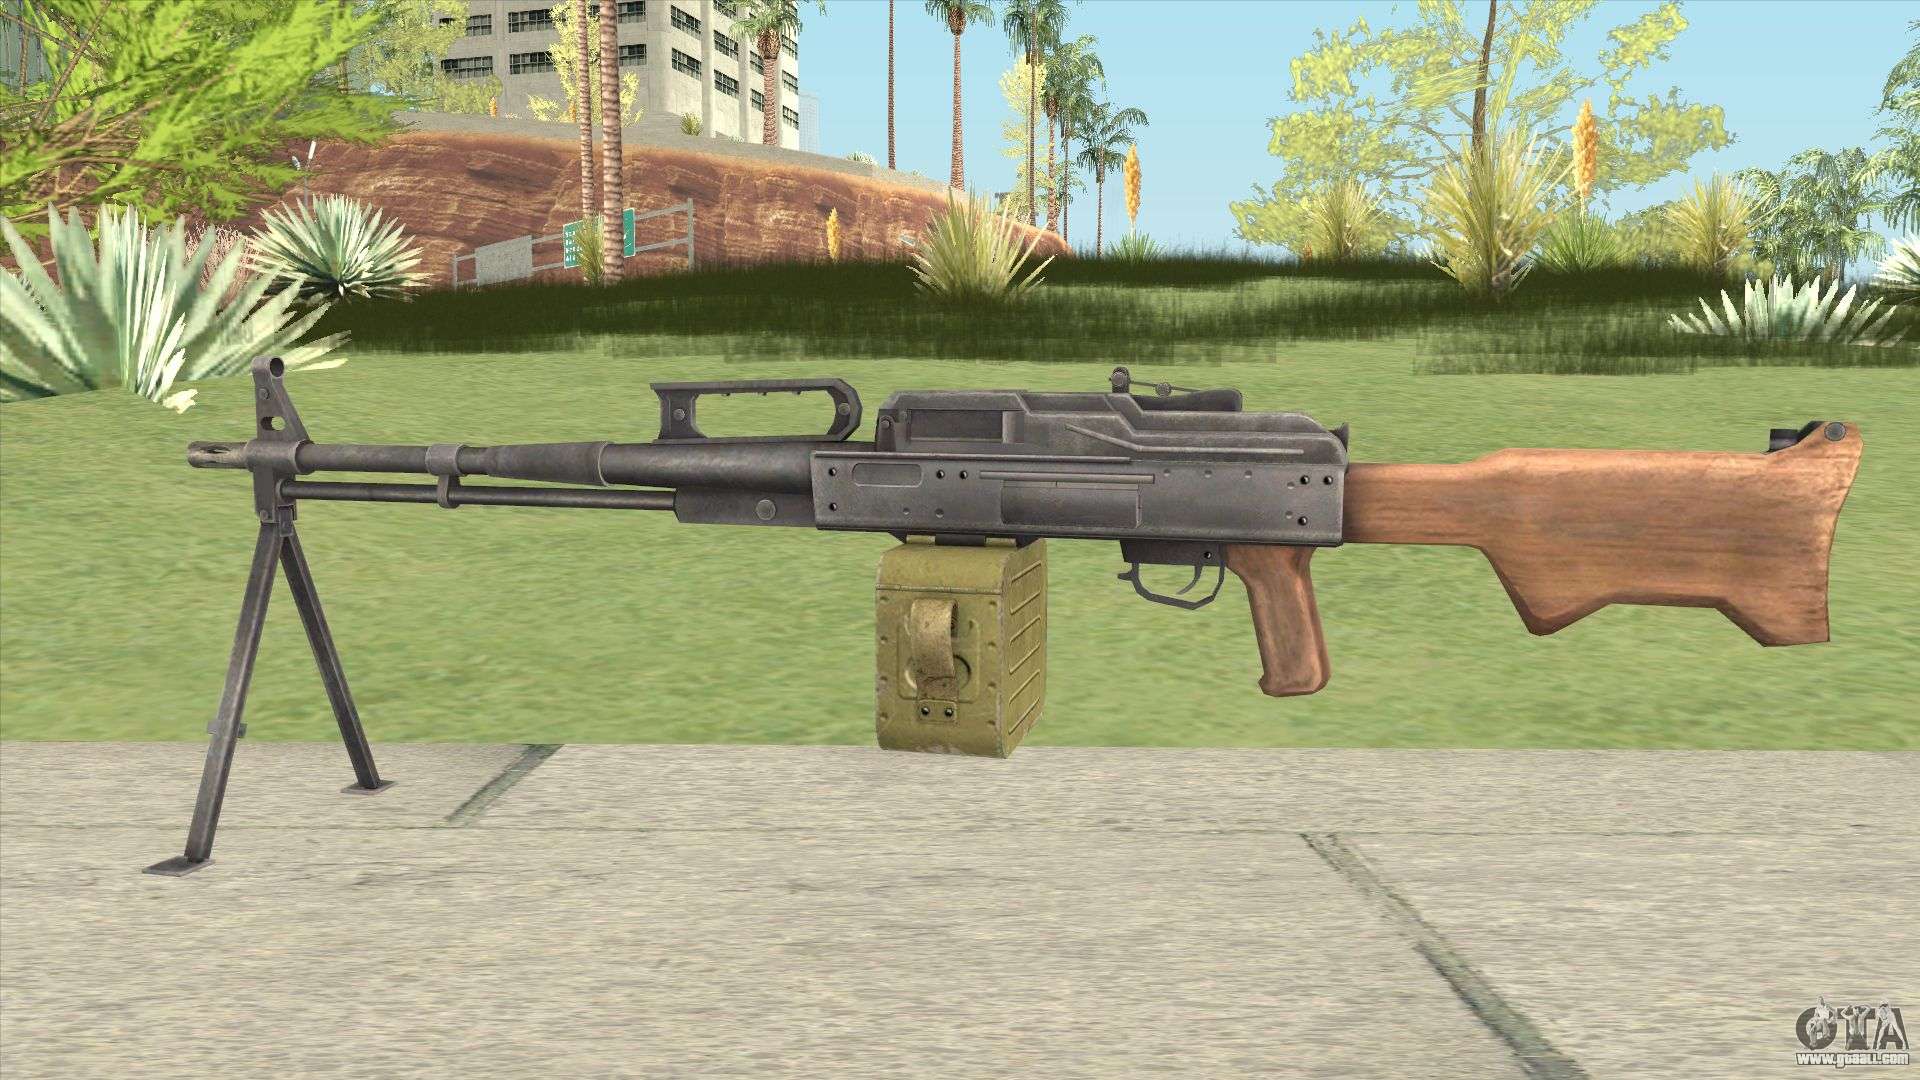 Sof P Pkm Soldier Of Fortune For Gta San Andreas Images, Photos, Reviews